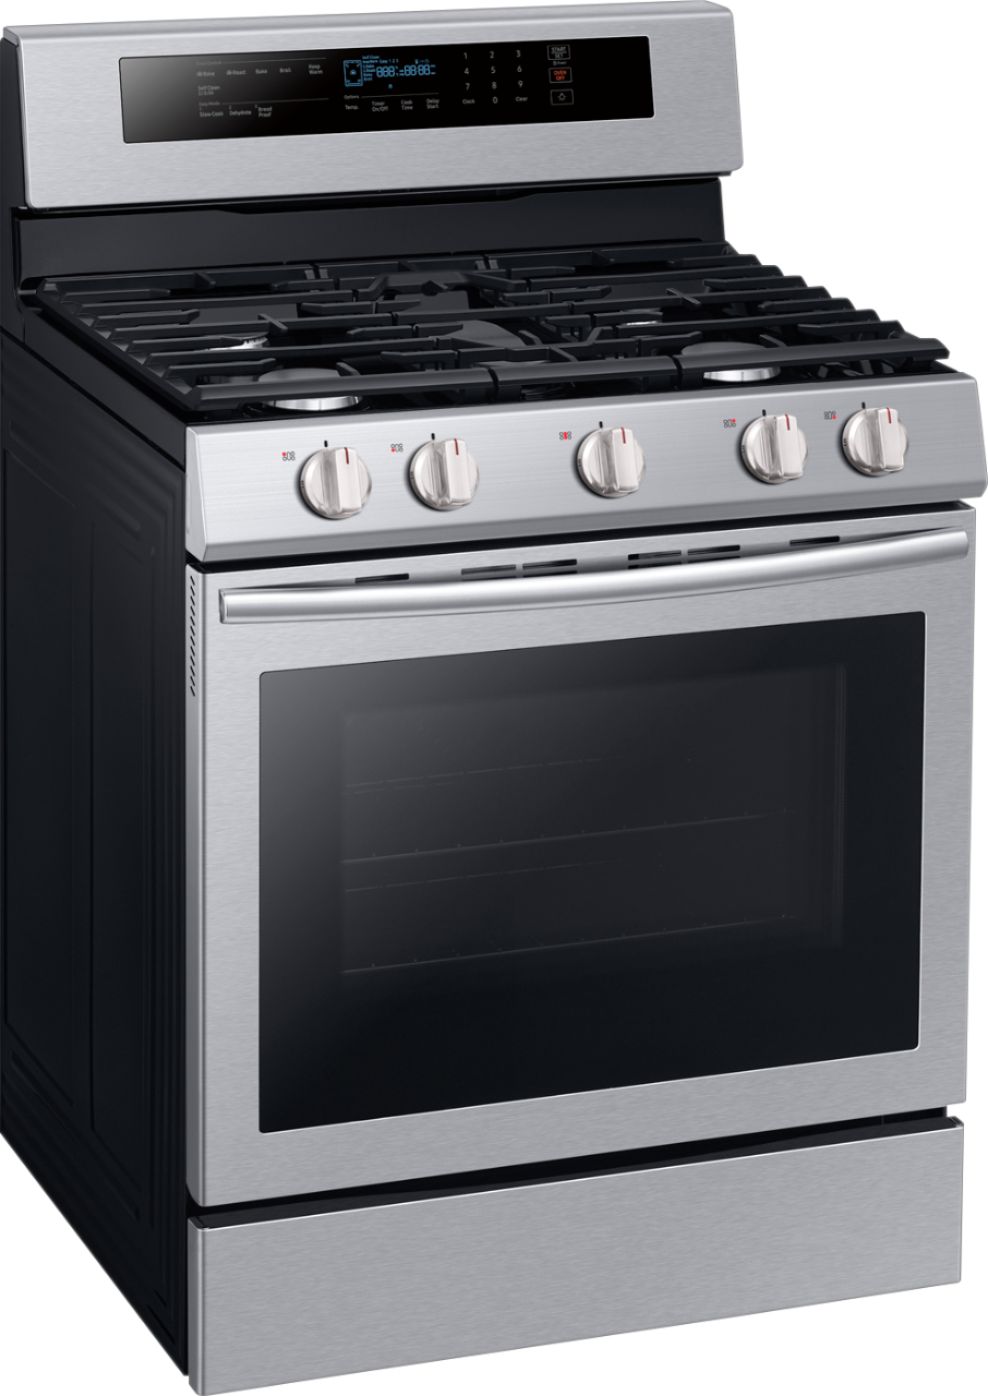 Angle View: Viking - 8 Cu. Ft. Freestanding Double Oven LP Gas Convection Range - Stainless steel